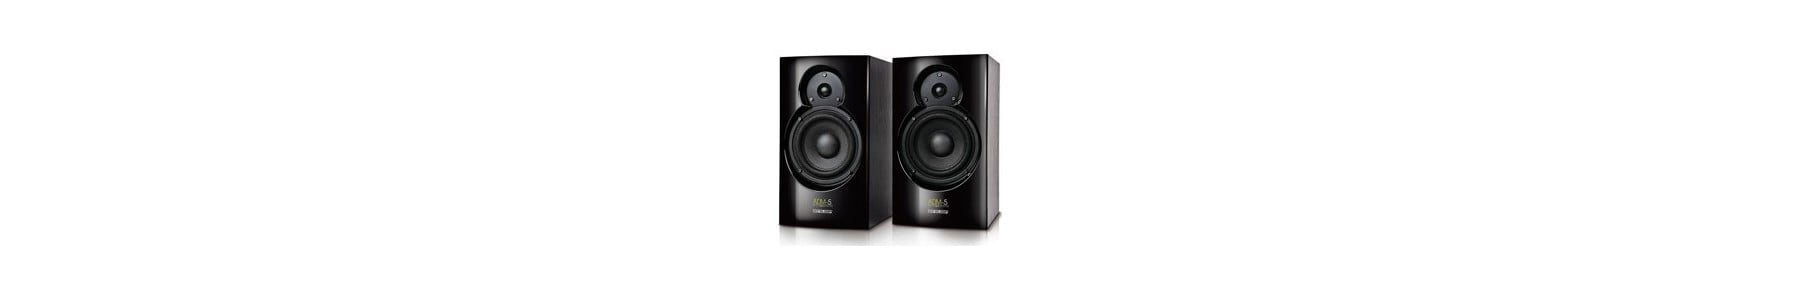 Speakers for sale online At Lowest Prices